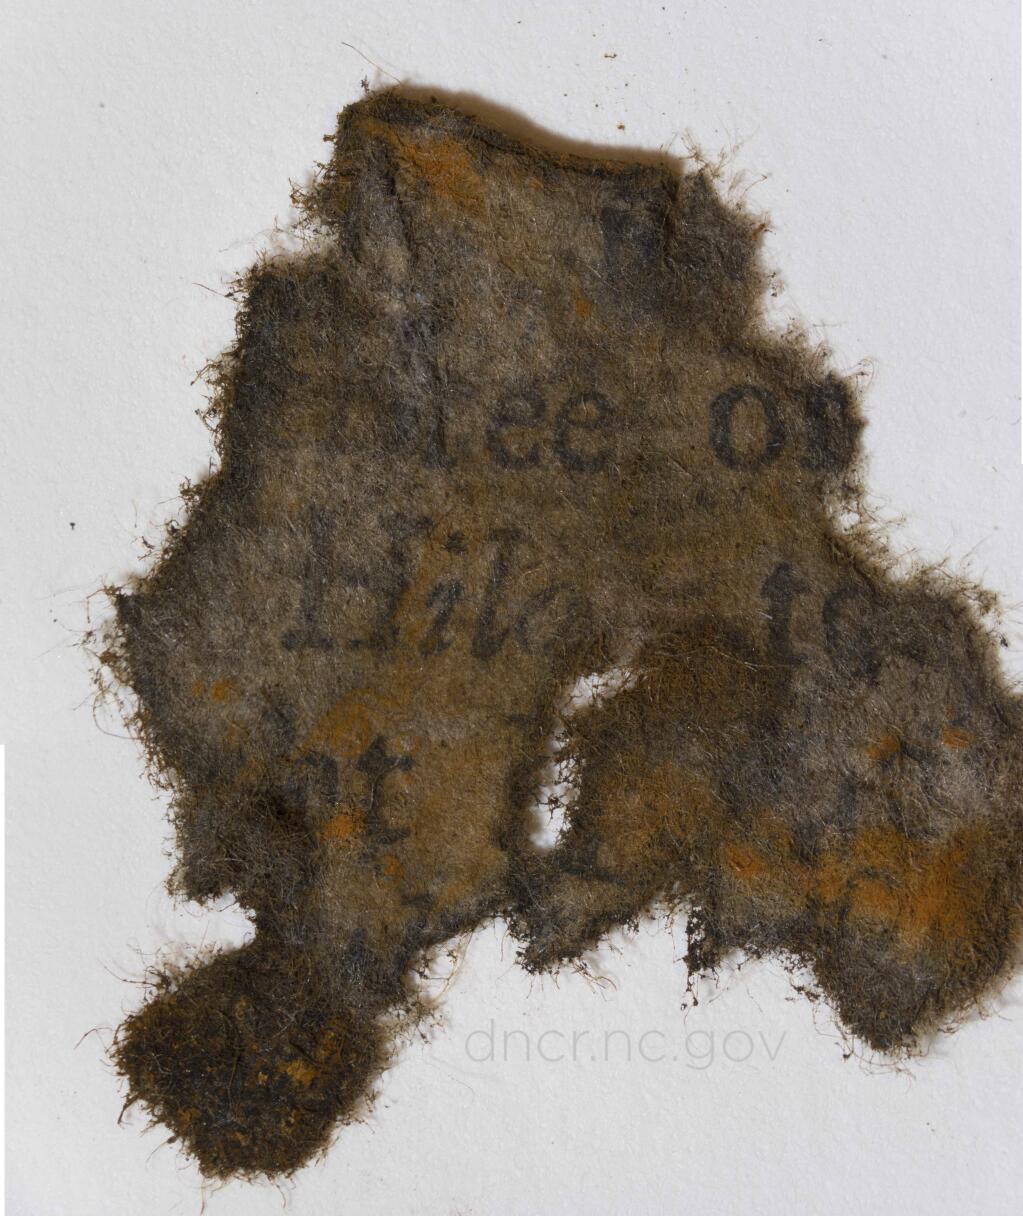 This undated photo made available by the North Carolina Department of Natural Resources shows a piece of paper from books found on board Blackbeard's ship the Queen Anne's Revenge. To find paper in the 300-year-old shipwreck in warm waters is 'almost unheard of,' said Erik Farrell, a conservator at the QAR Conservation Lab in Greenville. (North Carolina Department of Natural and Cultural Resources via AP)